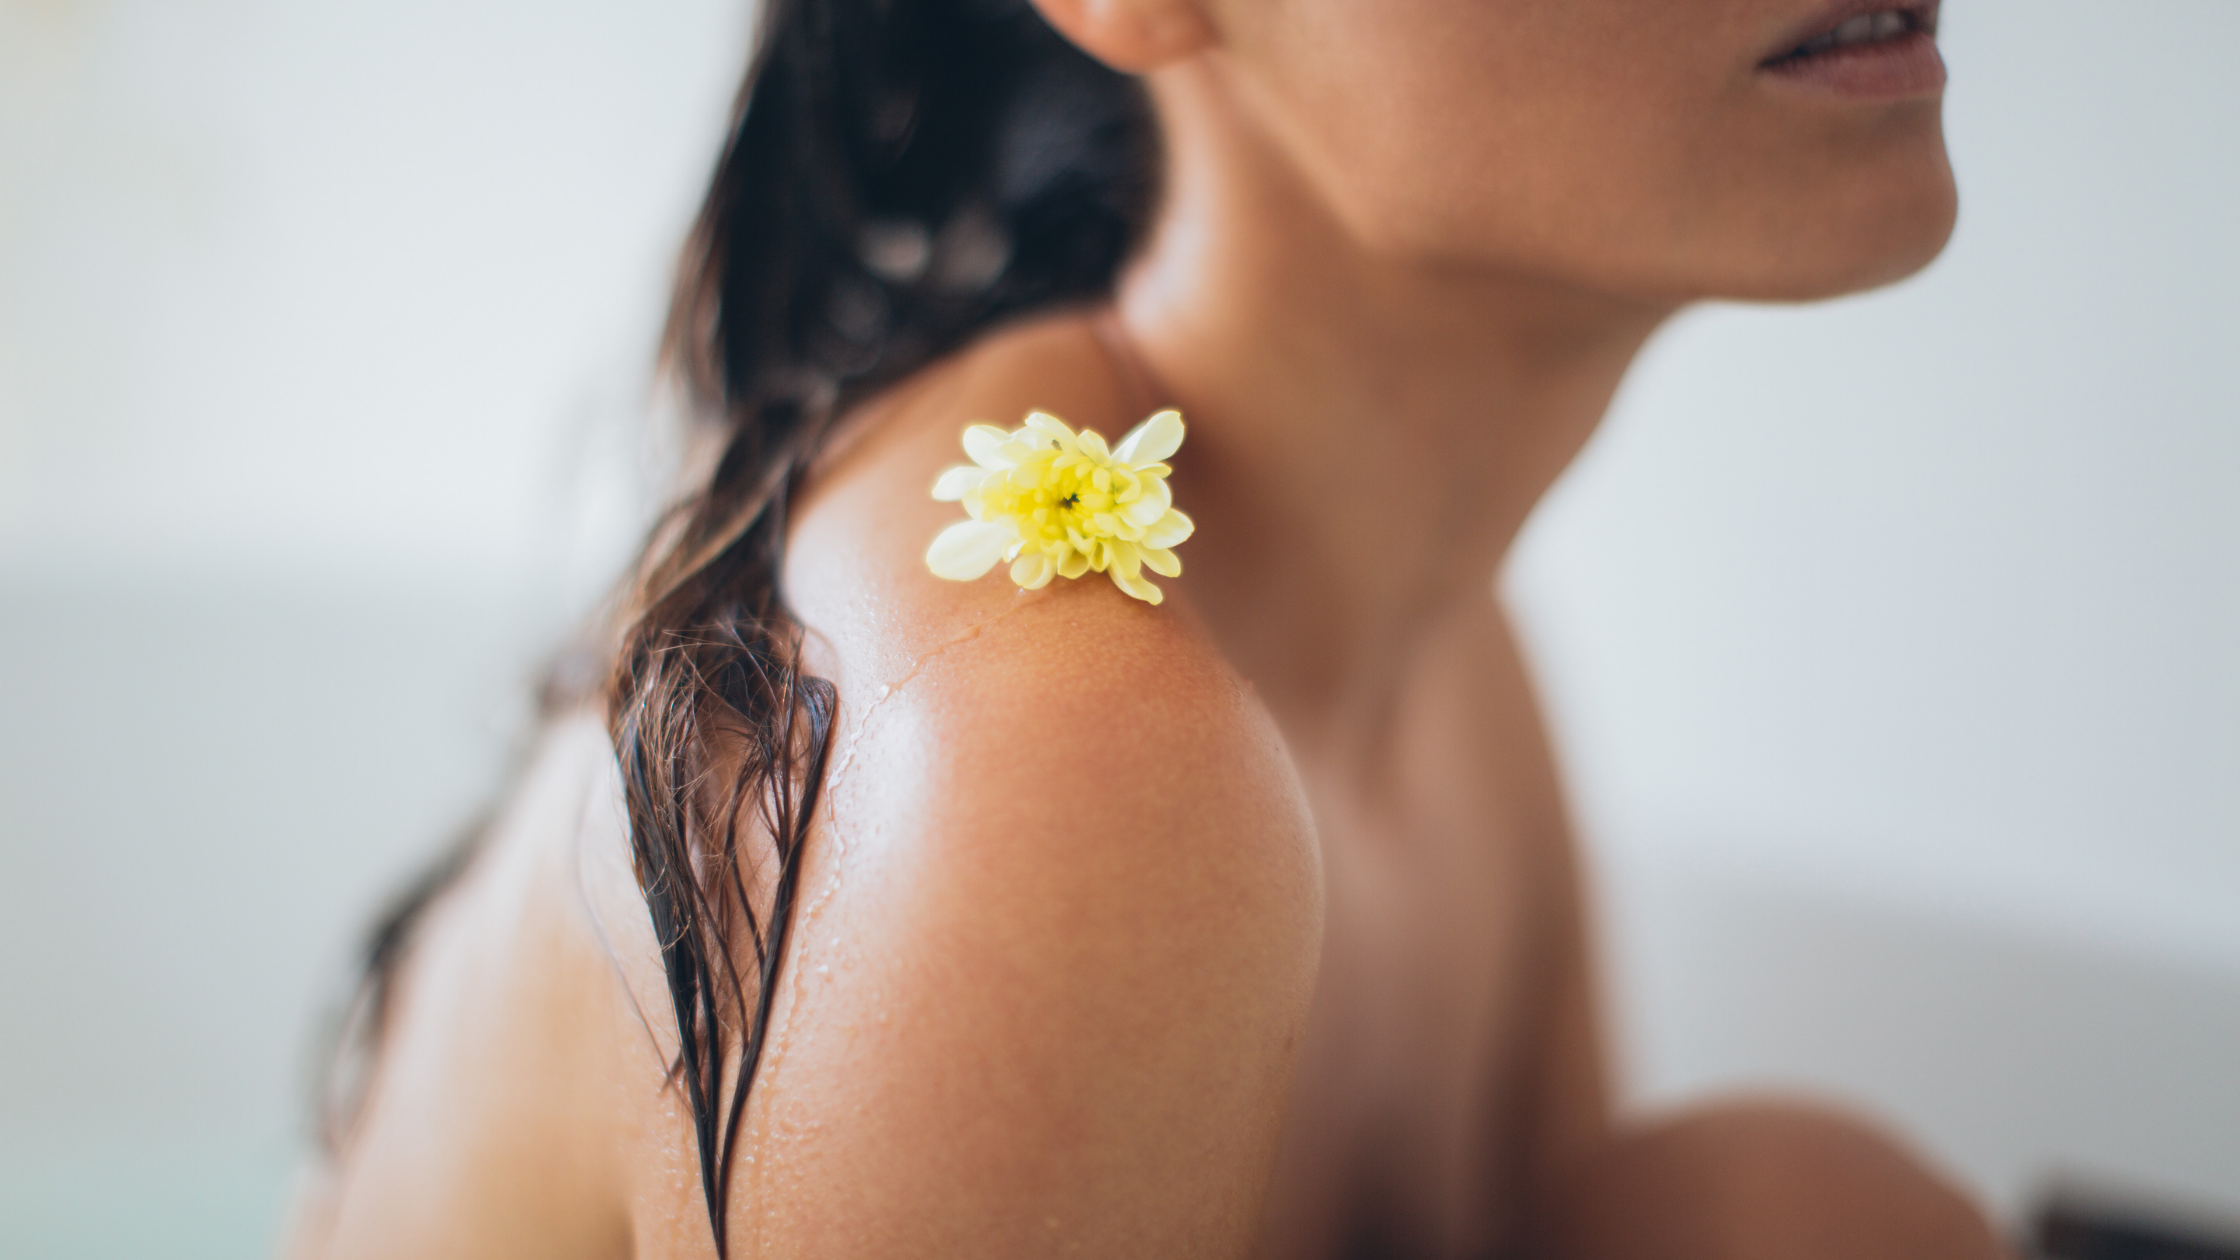 10 Skin & Body Care Tips to Live by